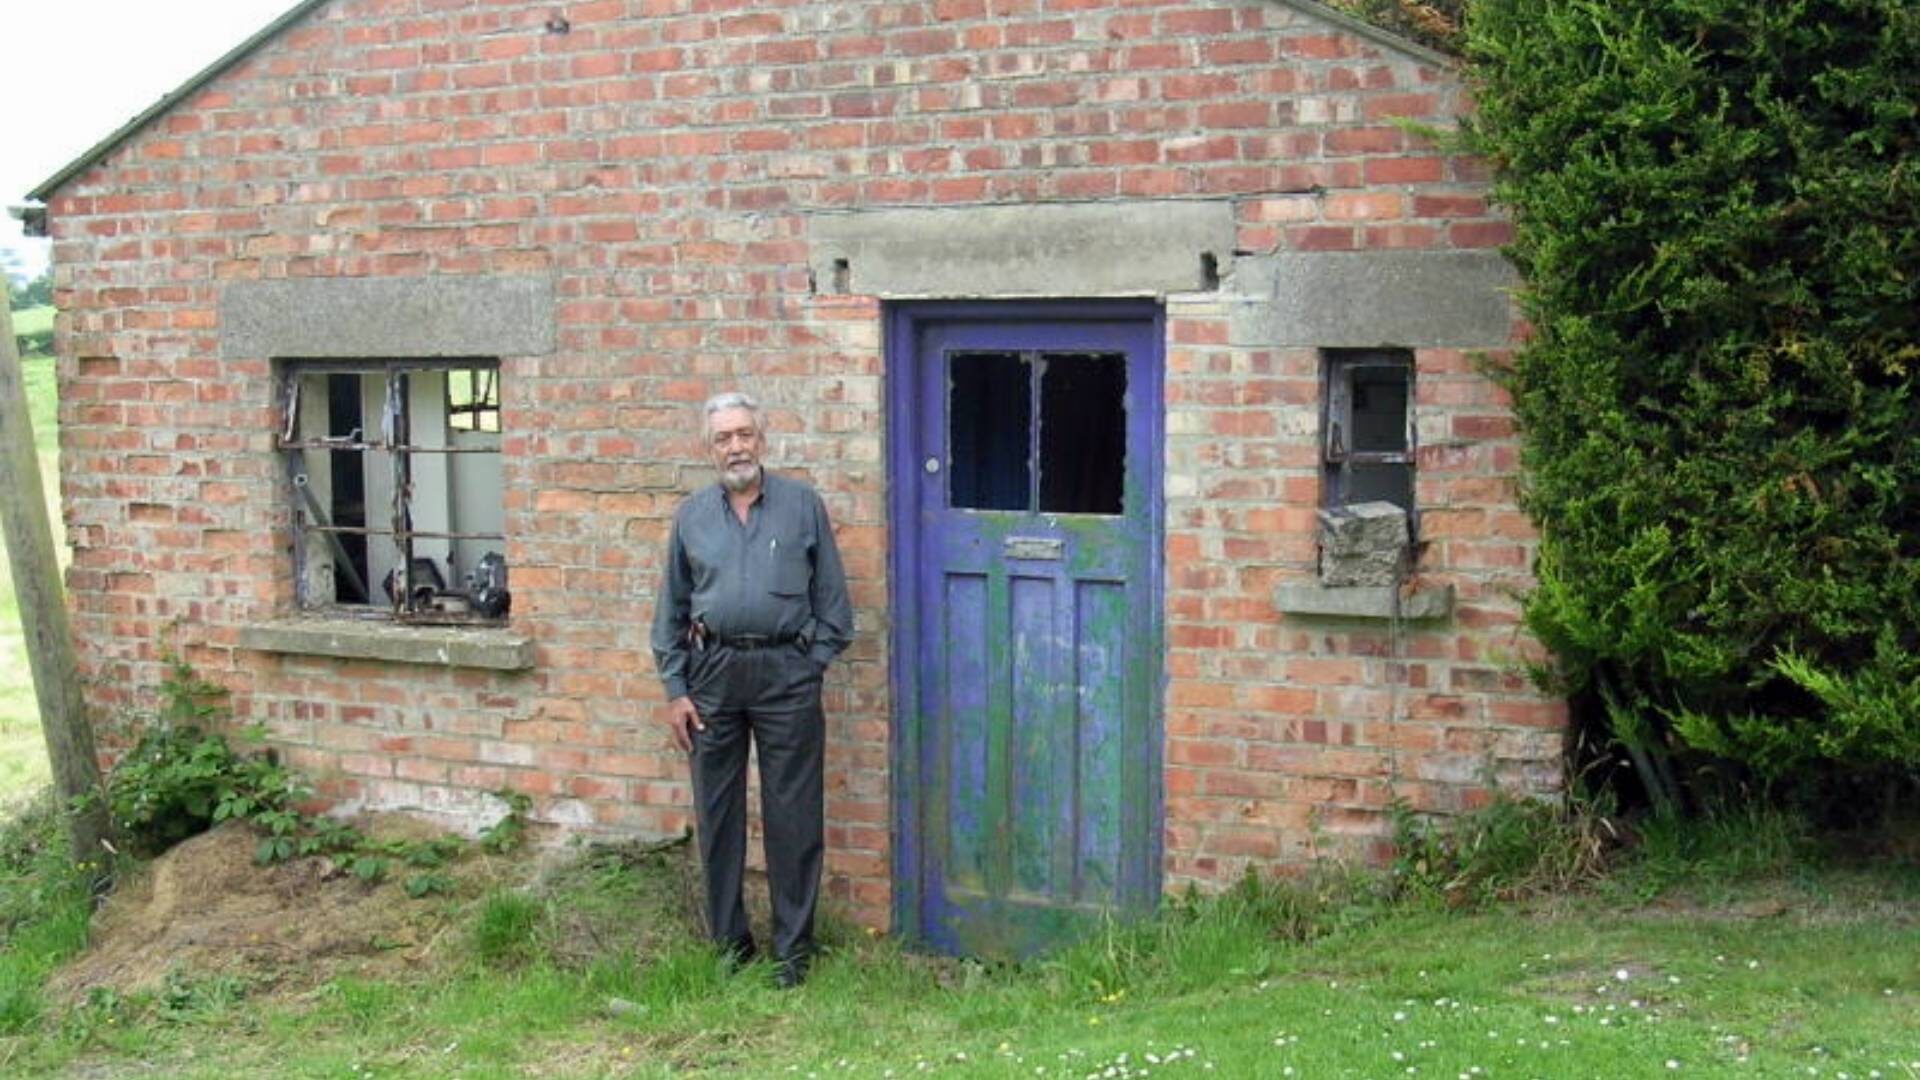 Clive Martinez was born in England when his family was evacuated from Gibraltar. He returned to Northern Ireland in later life to visit the former Camp no. 2, Cargagh near Downpatrick, Co. Down.